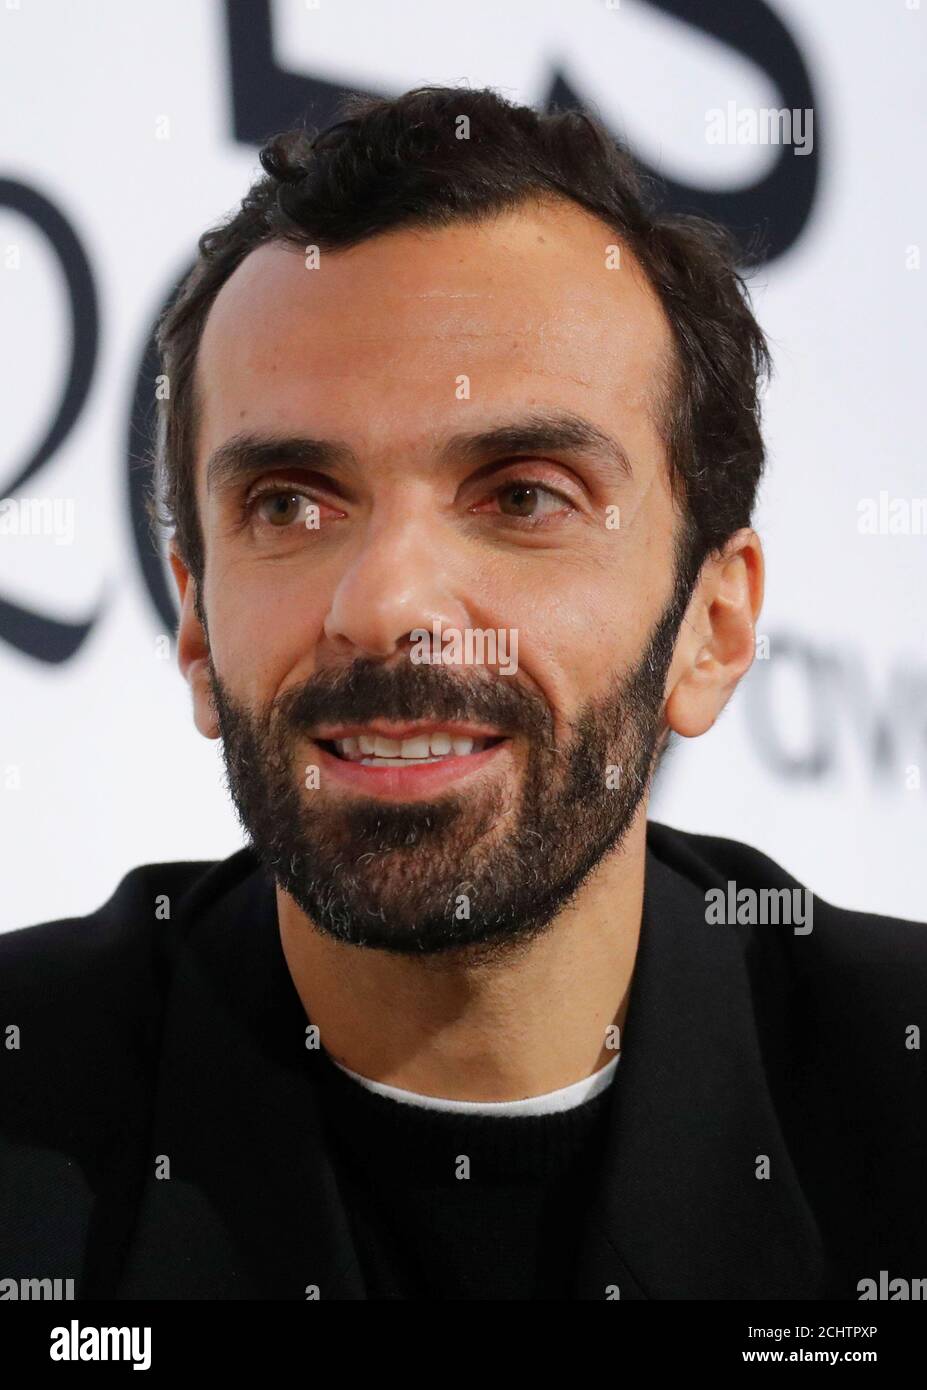 Cedric Charbit, CEO of Balenciaga fashion house, attends the 4th edition of  the Vogue Fashion Festival in Paris, France, November 15, 2019.  REUTERS/Gonzalo Fuentes Stock Photo - Alamy